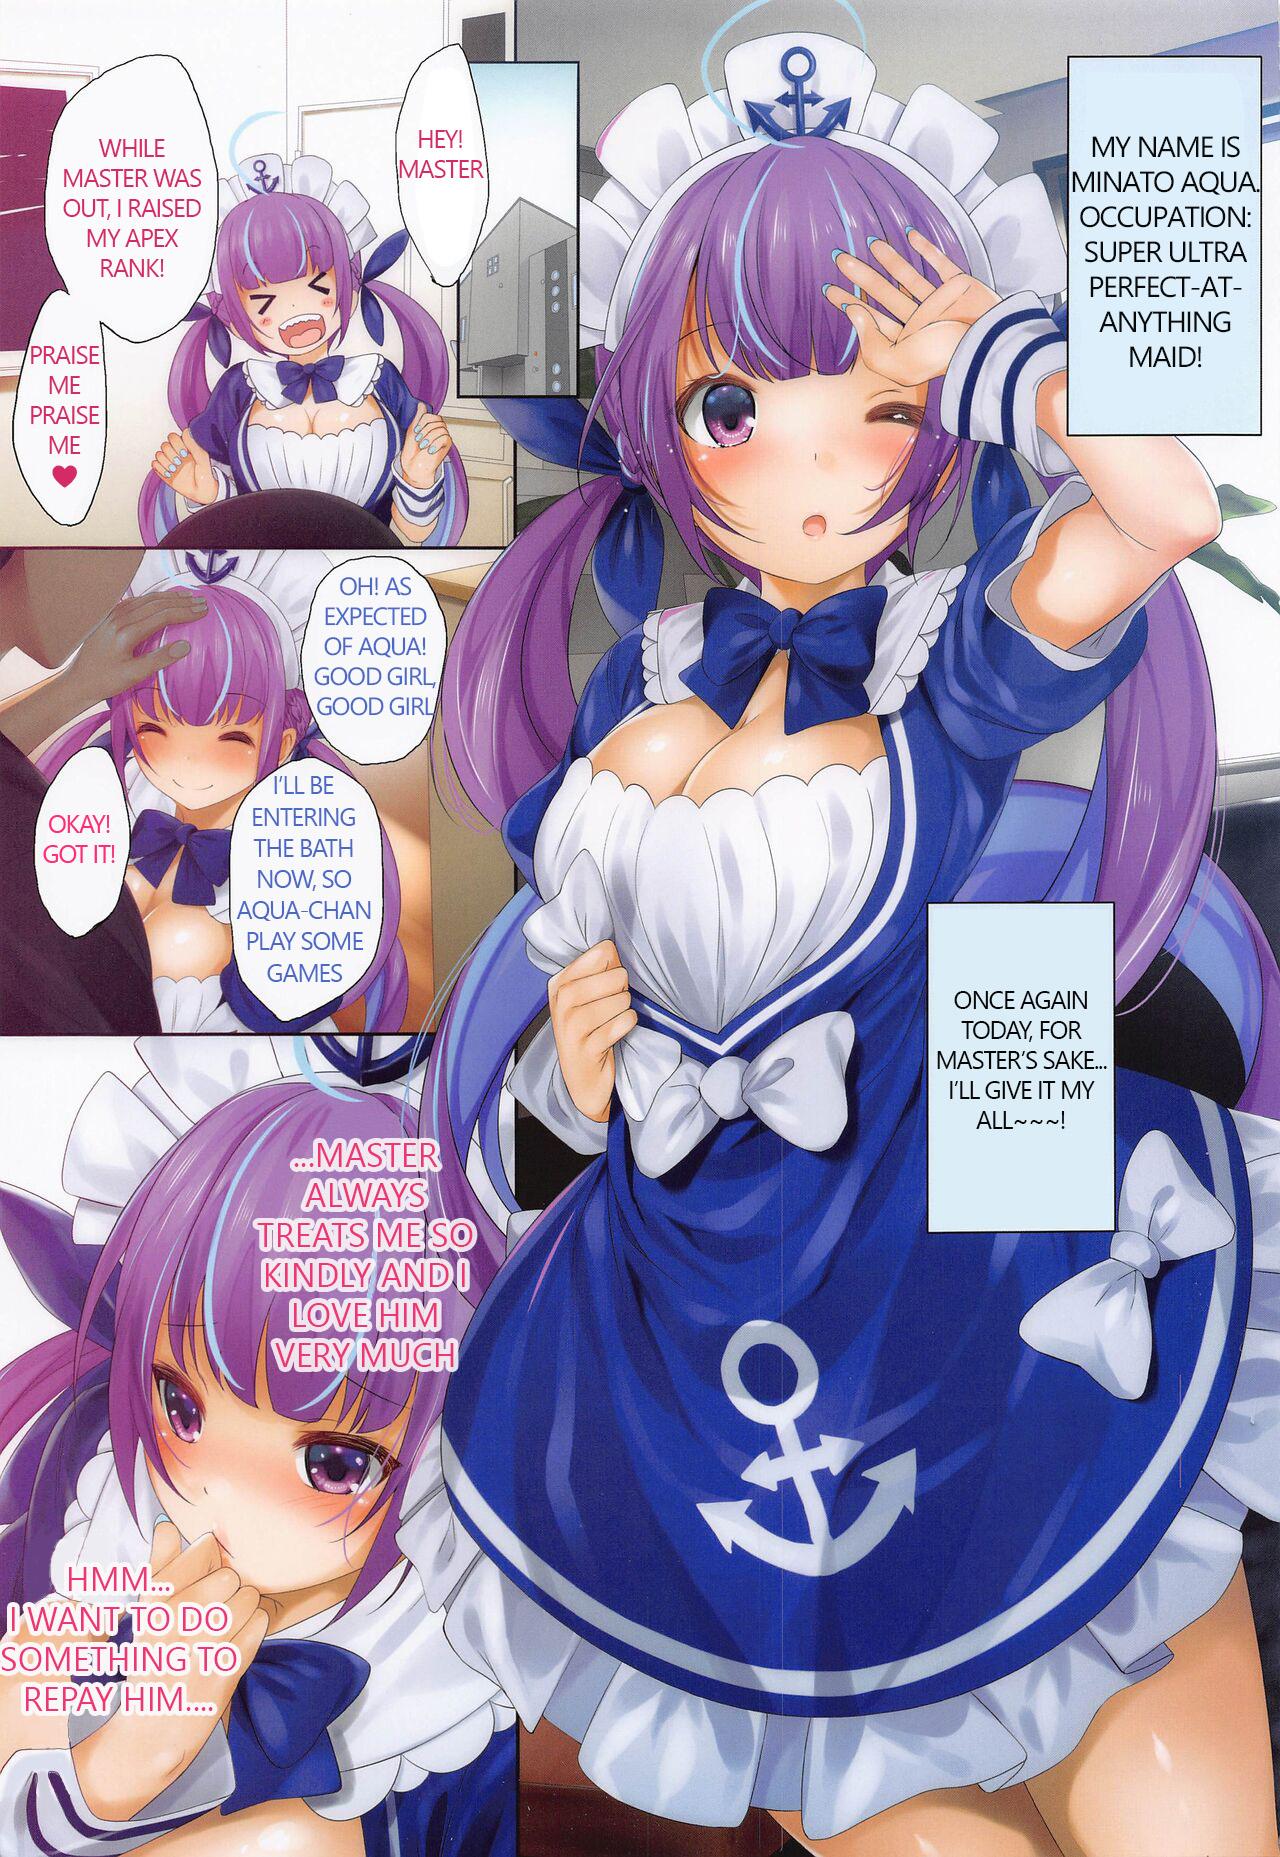 European Porn A・Q・U・A for the LOVE - Hololive Gay Latino - Page 2